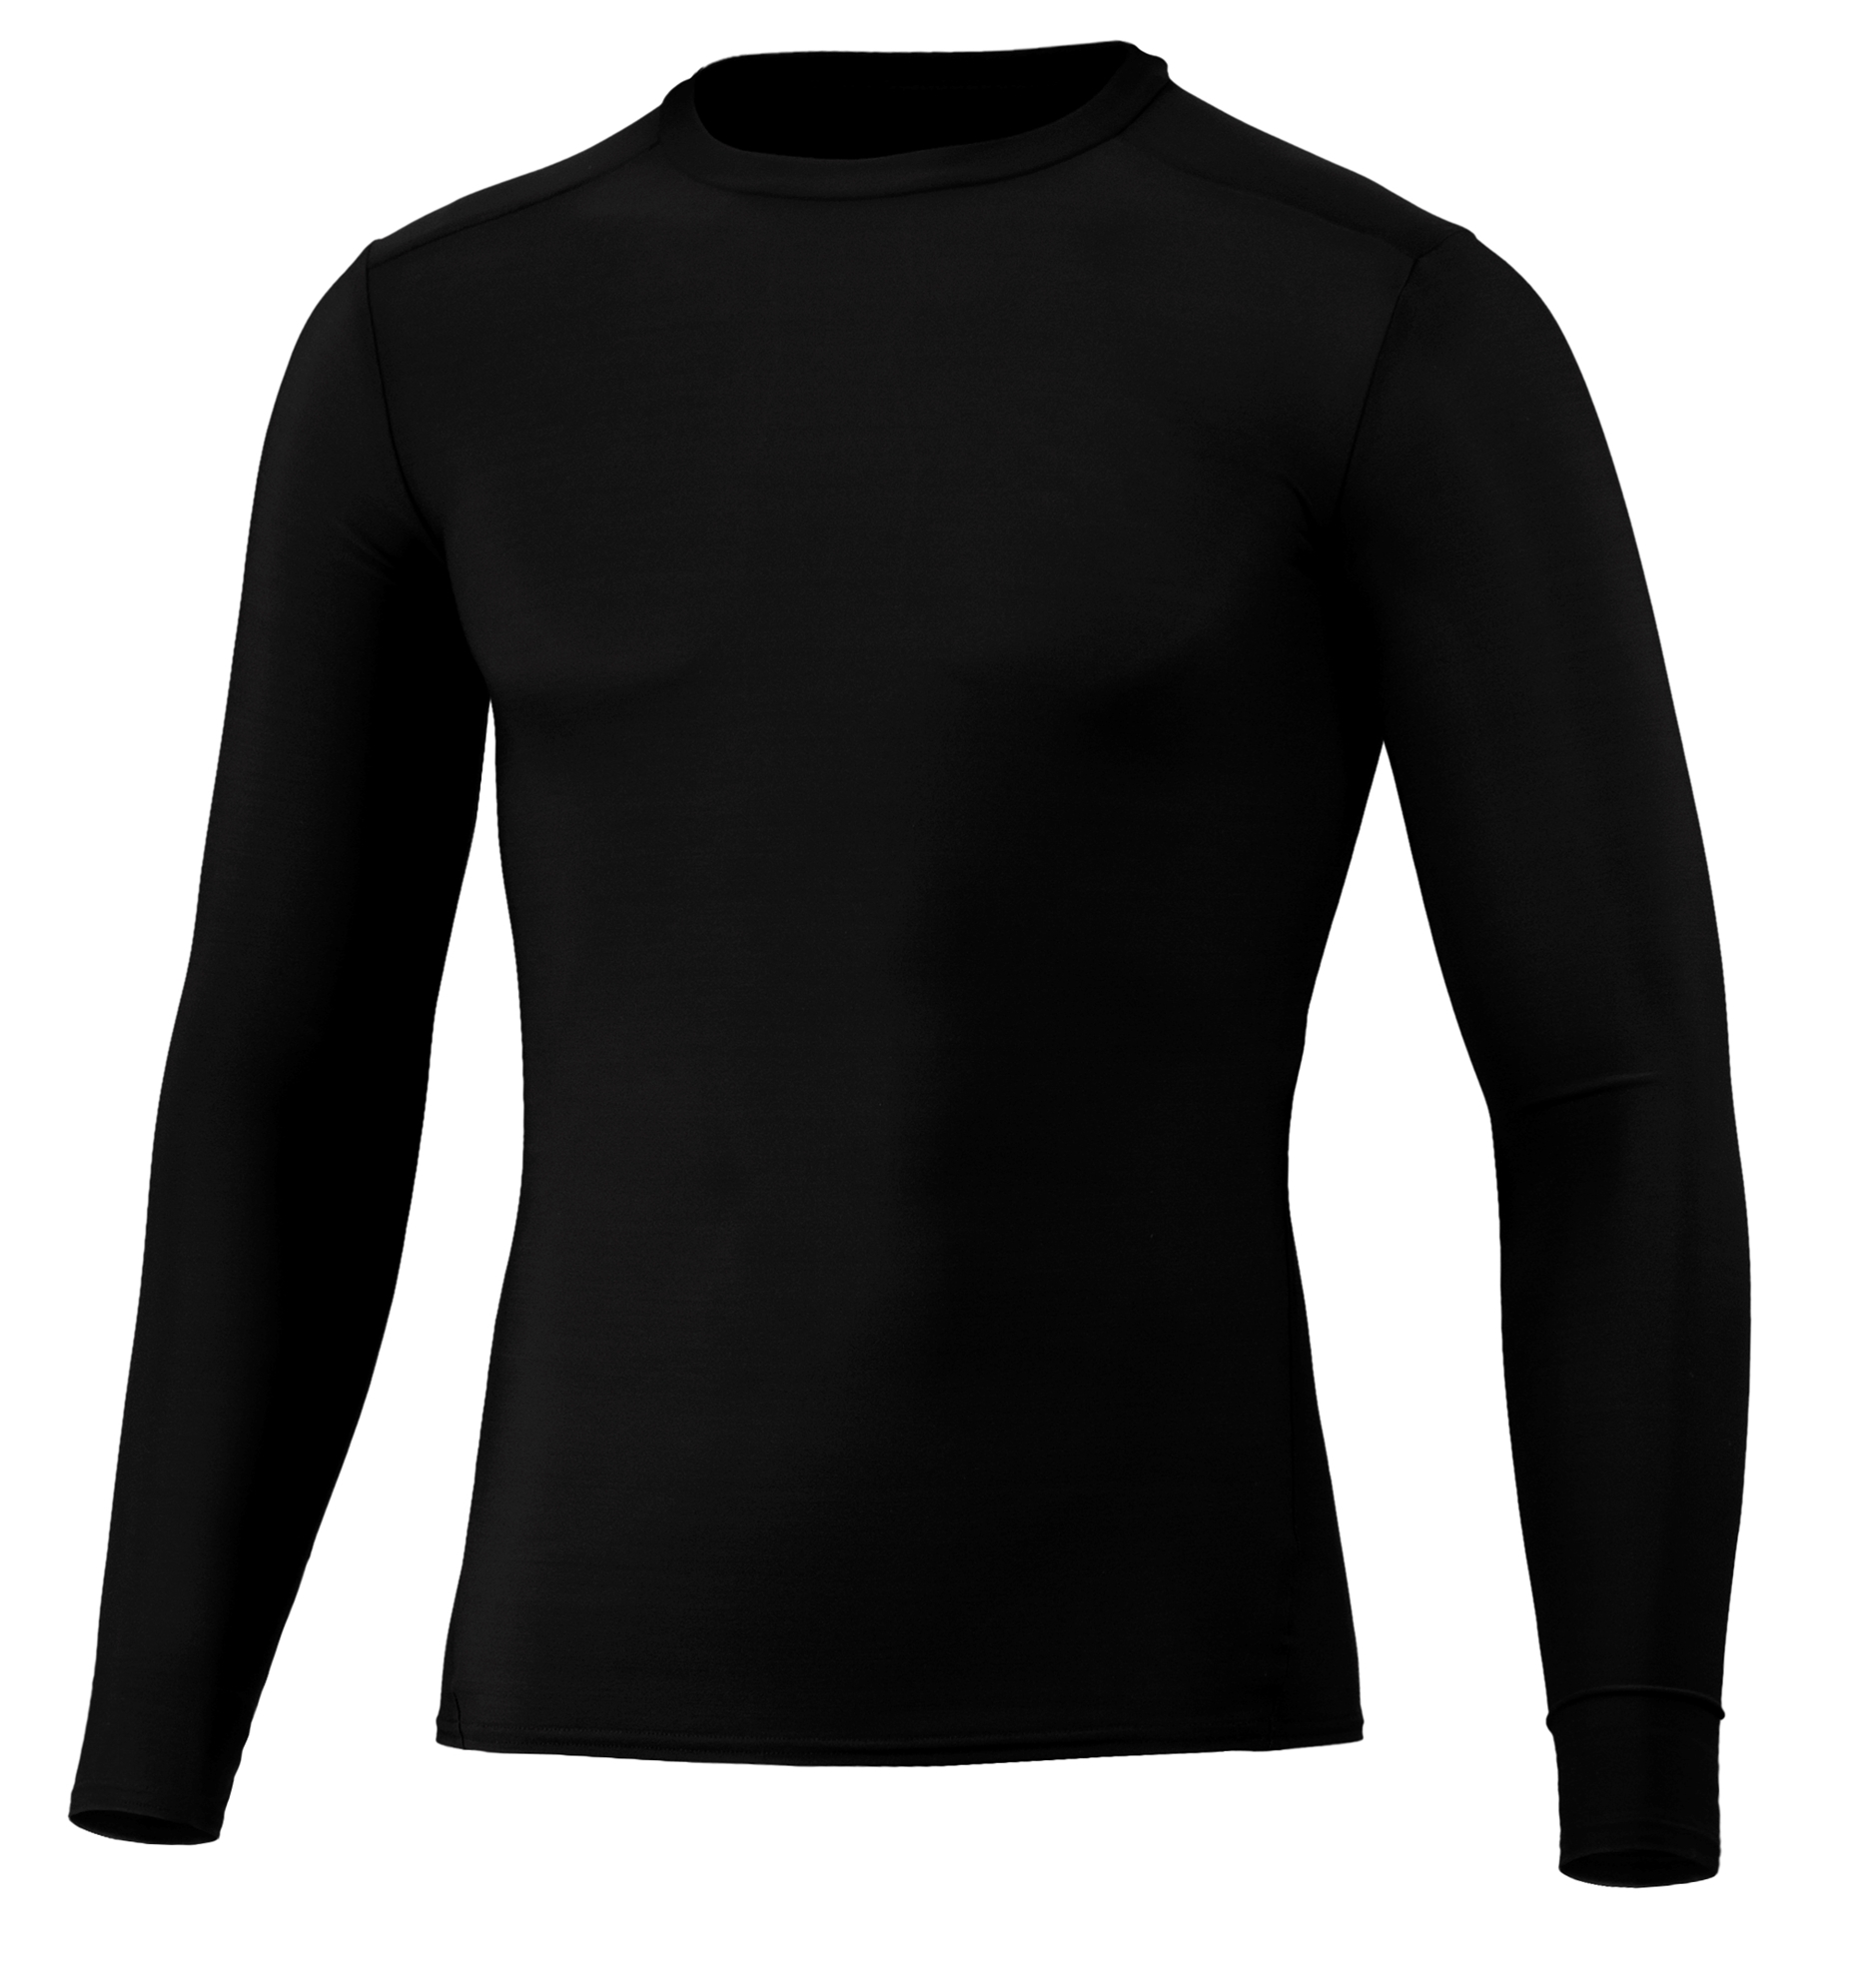 BAW Athletic Wear CT102Y - Youth Compression Long Sleeve T-Shirt